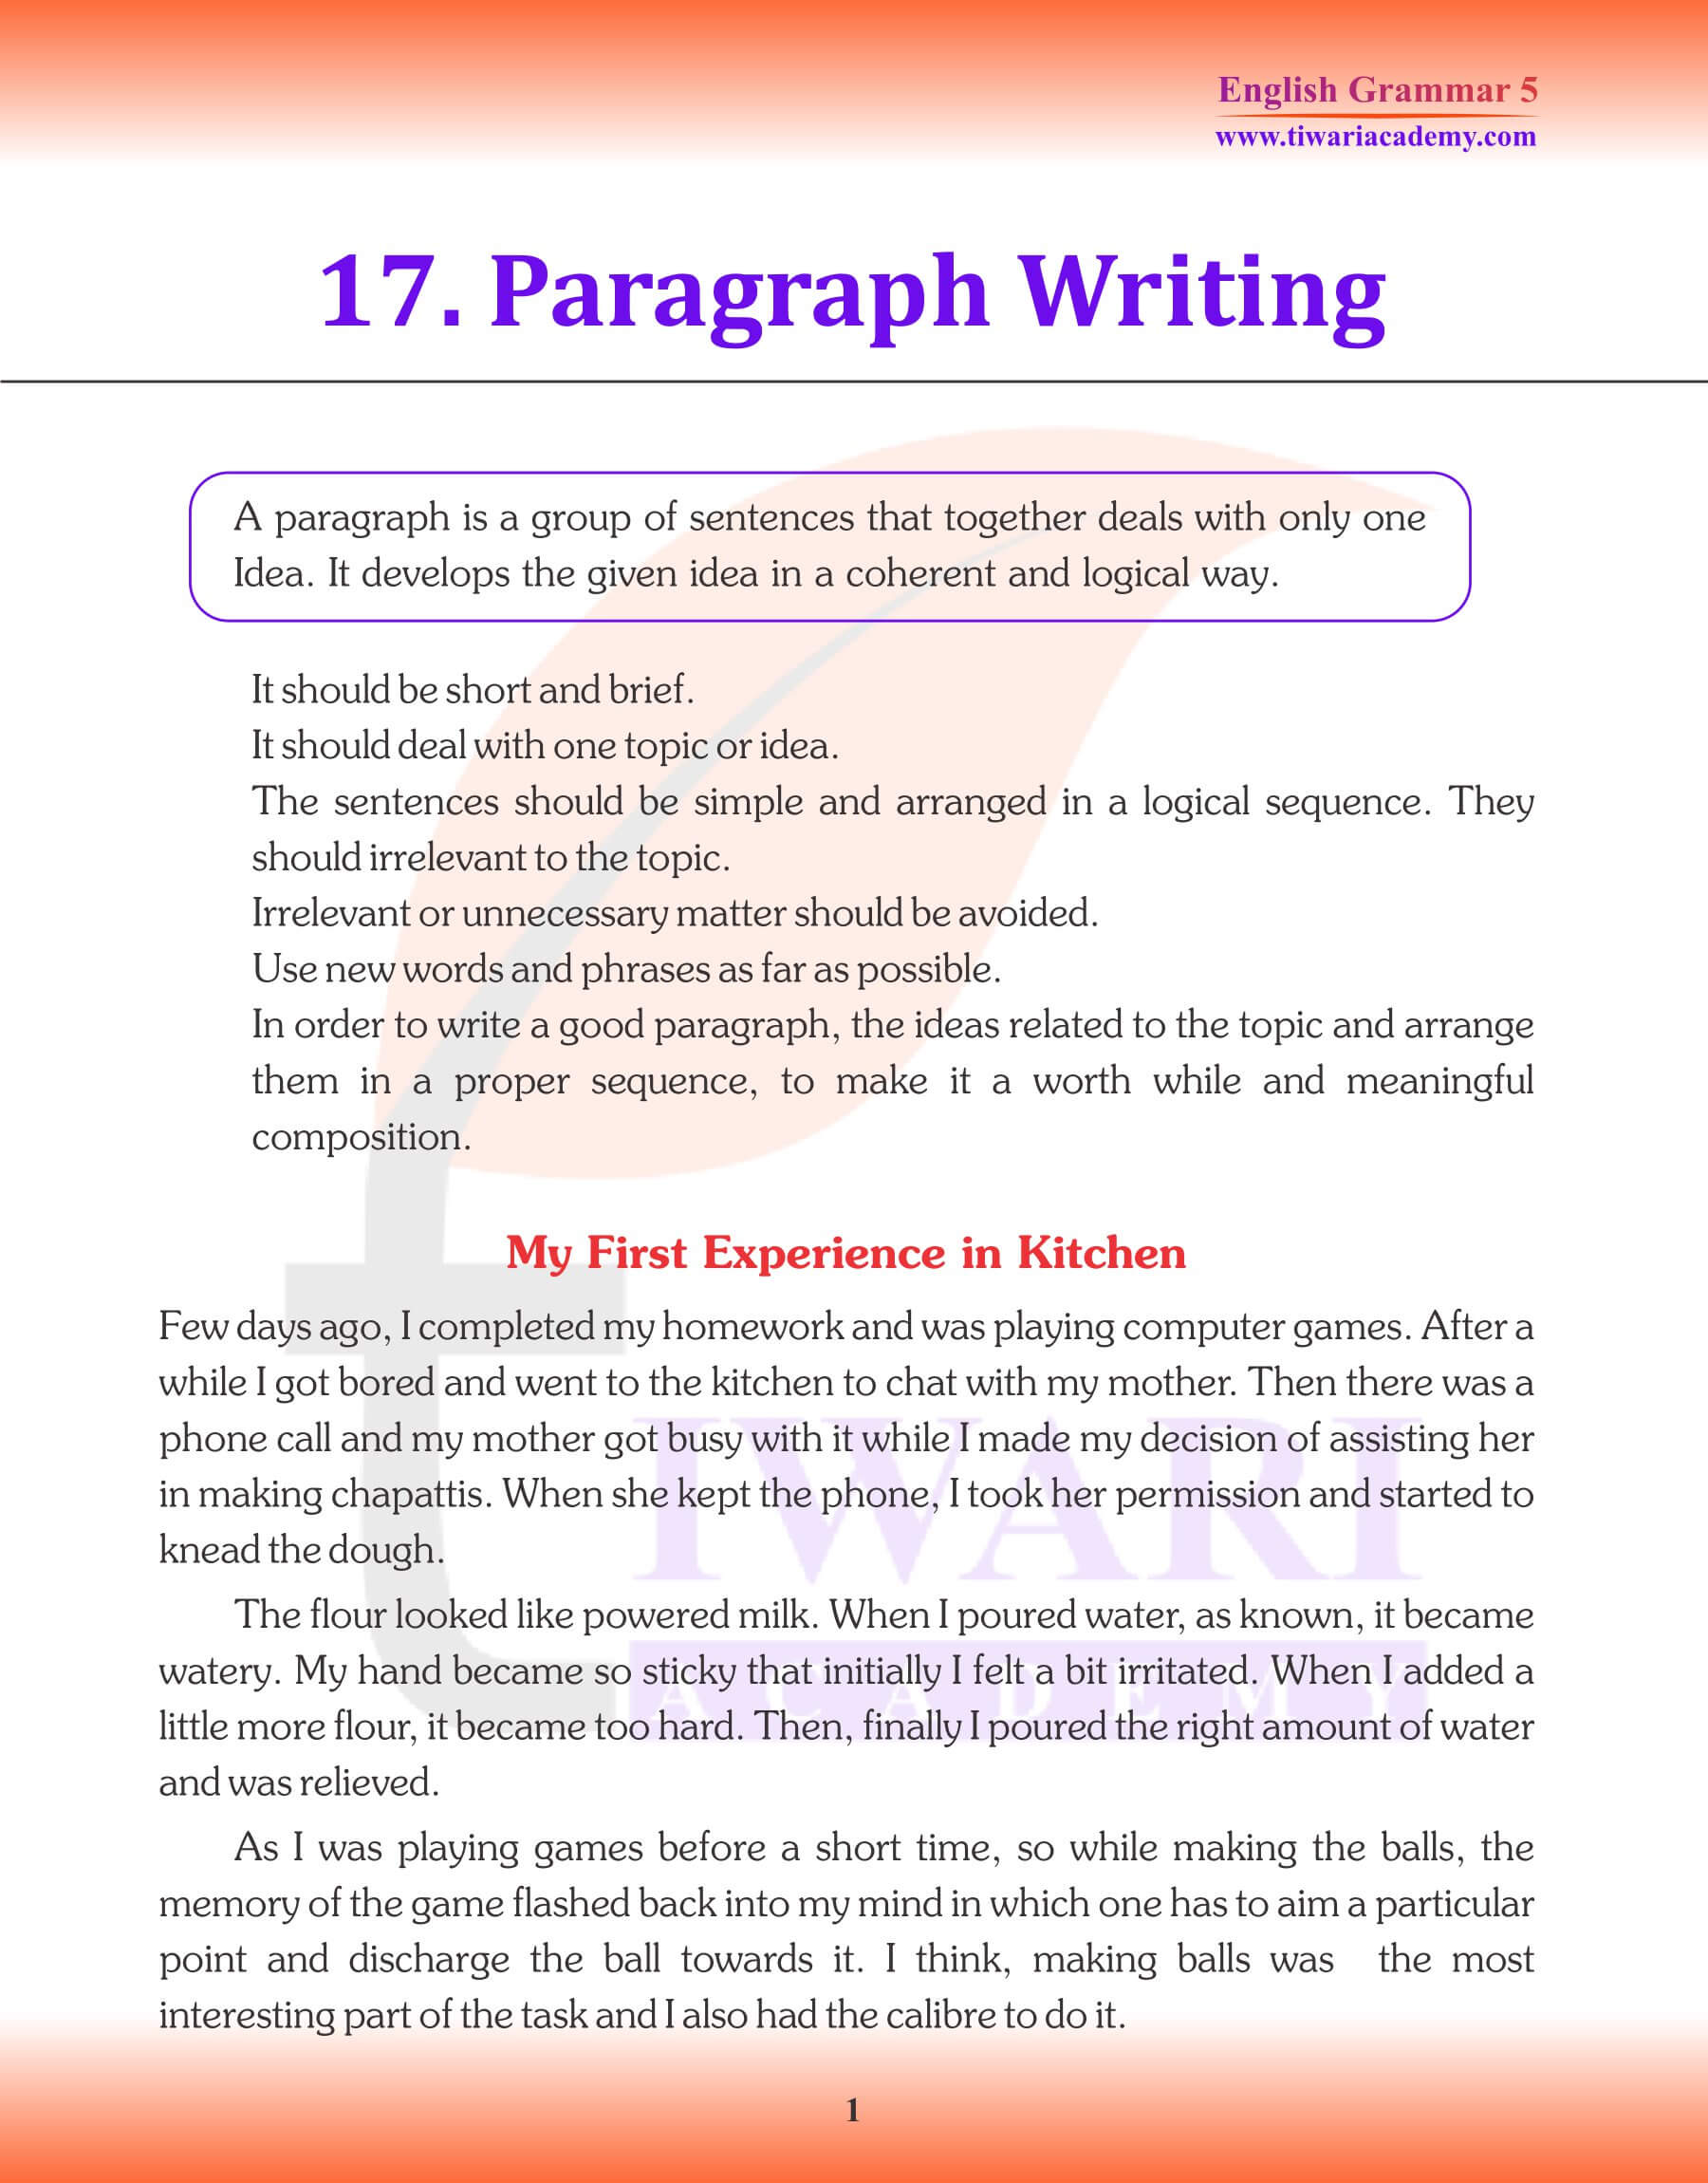 Class 5 English Grammar Chapter 17 Paragraph Writing Revision Book